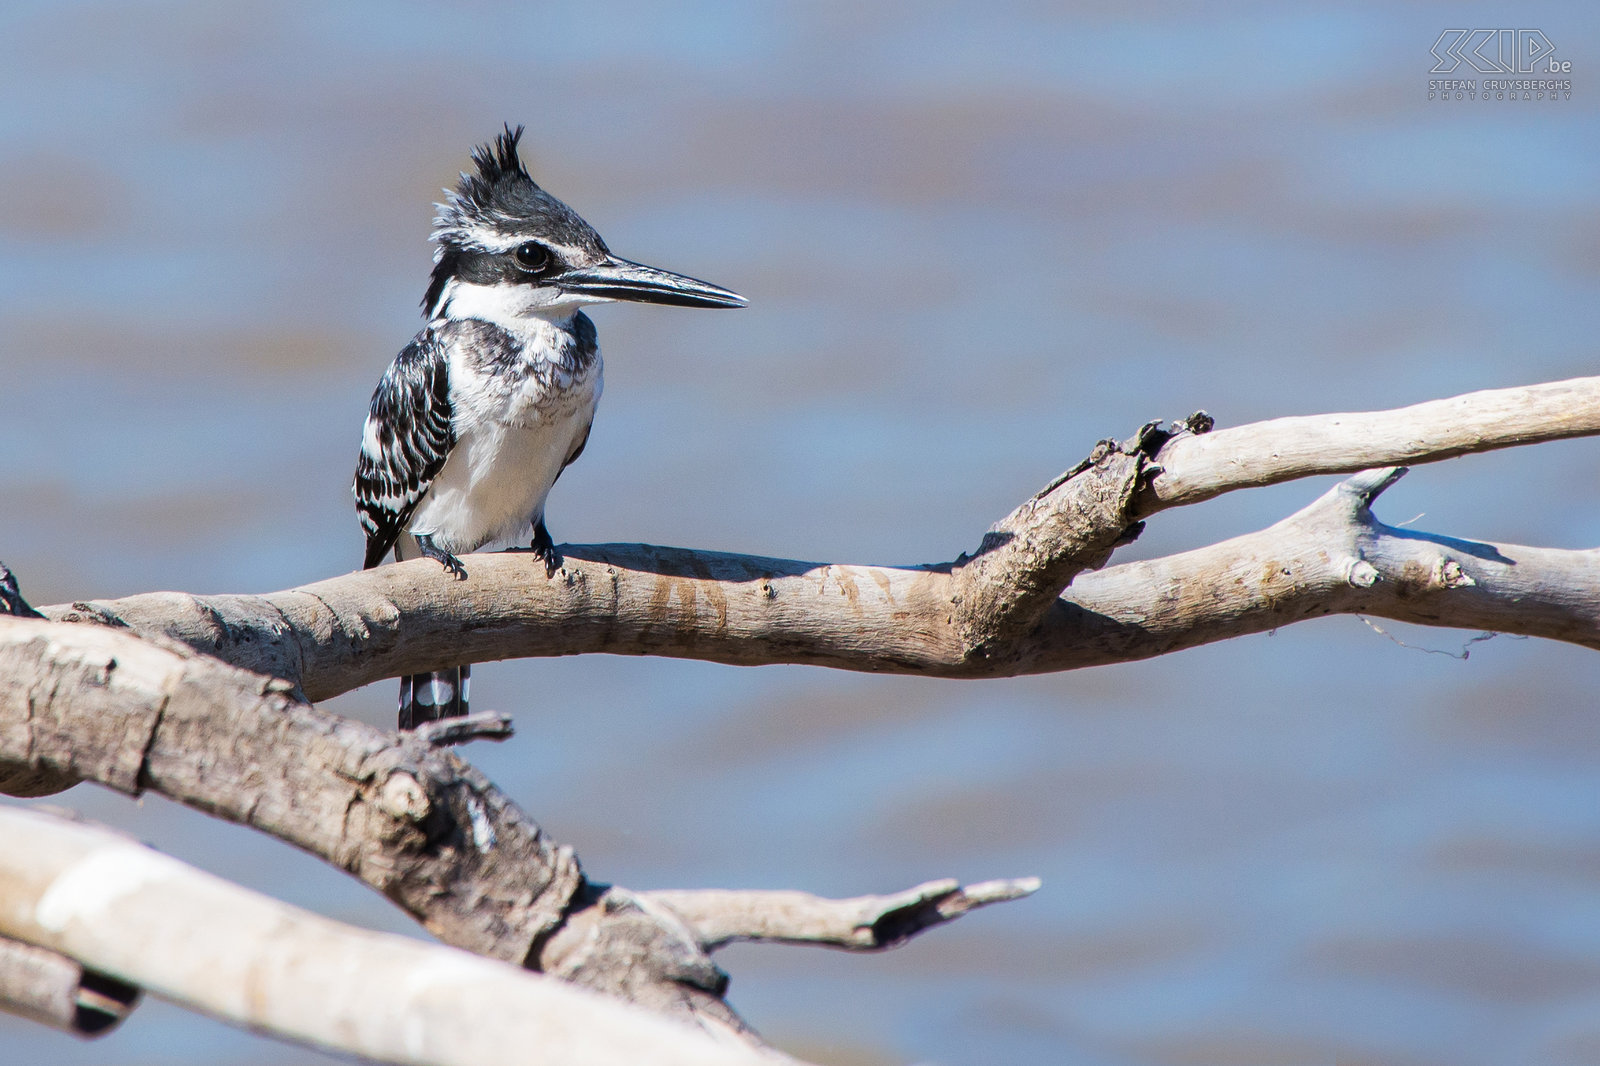 South Luangwa - Pied kingfisher The pied kingfisher (Ceryle rudis) has a black and white plumage. Stefan Cruysberghs